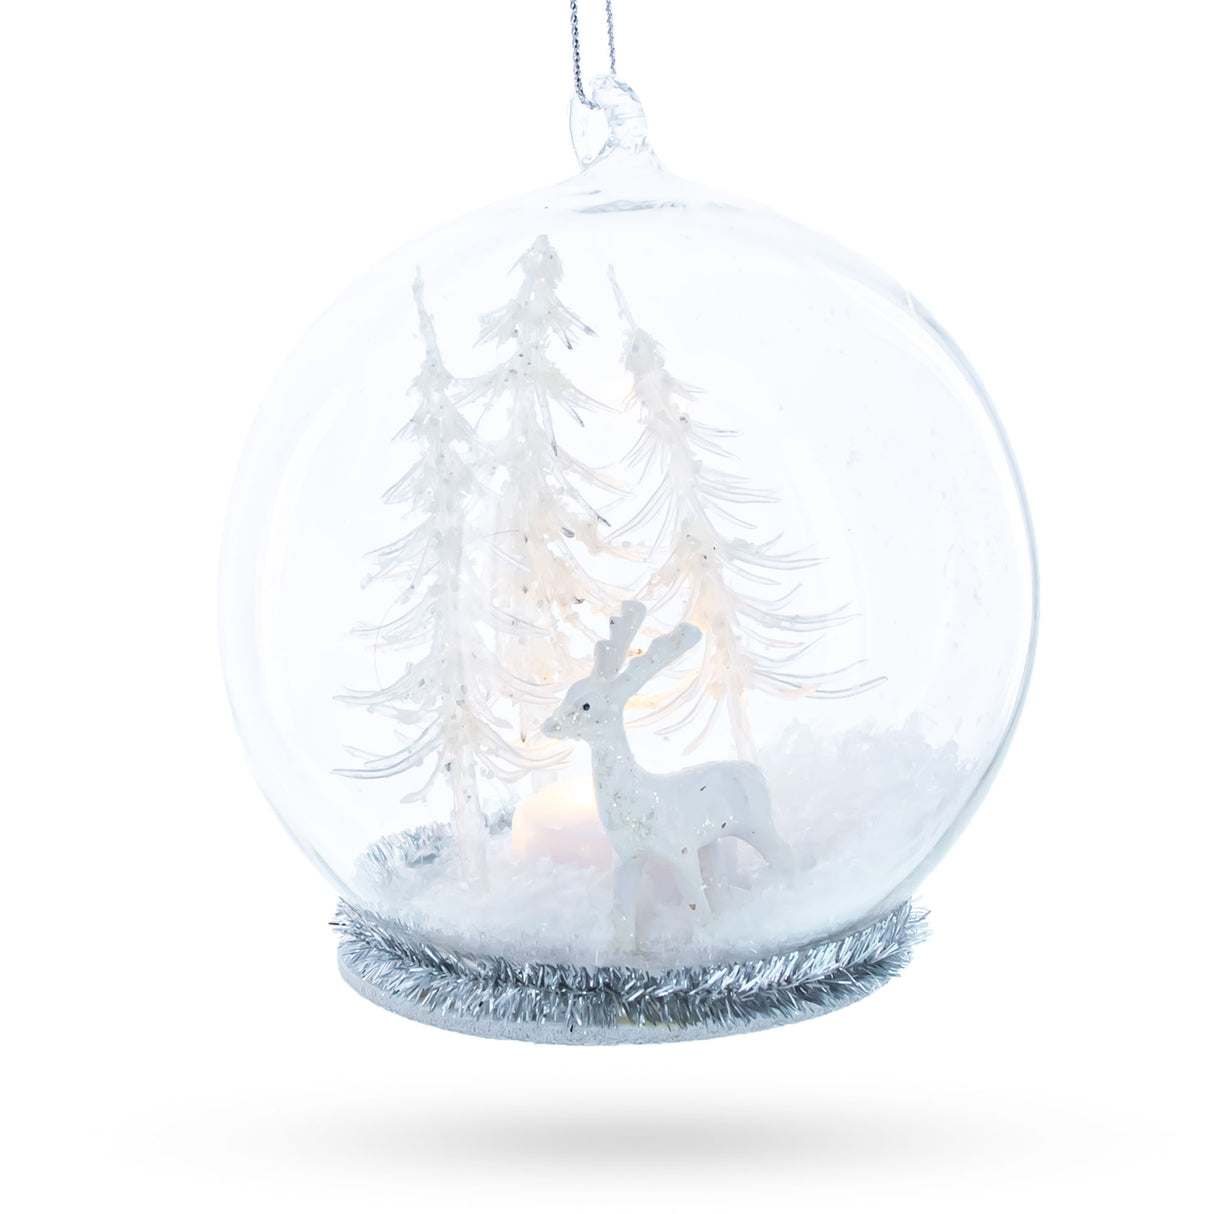 White Deer in Snow Globe with Glistening Snowflakes - Blown Glass Christmas Ornament in White color, Round shape